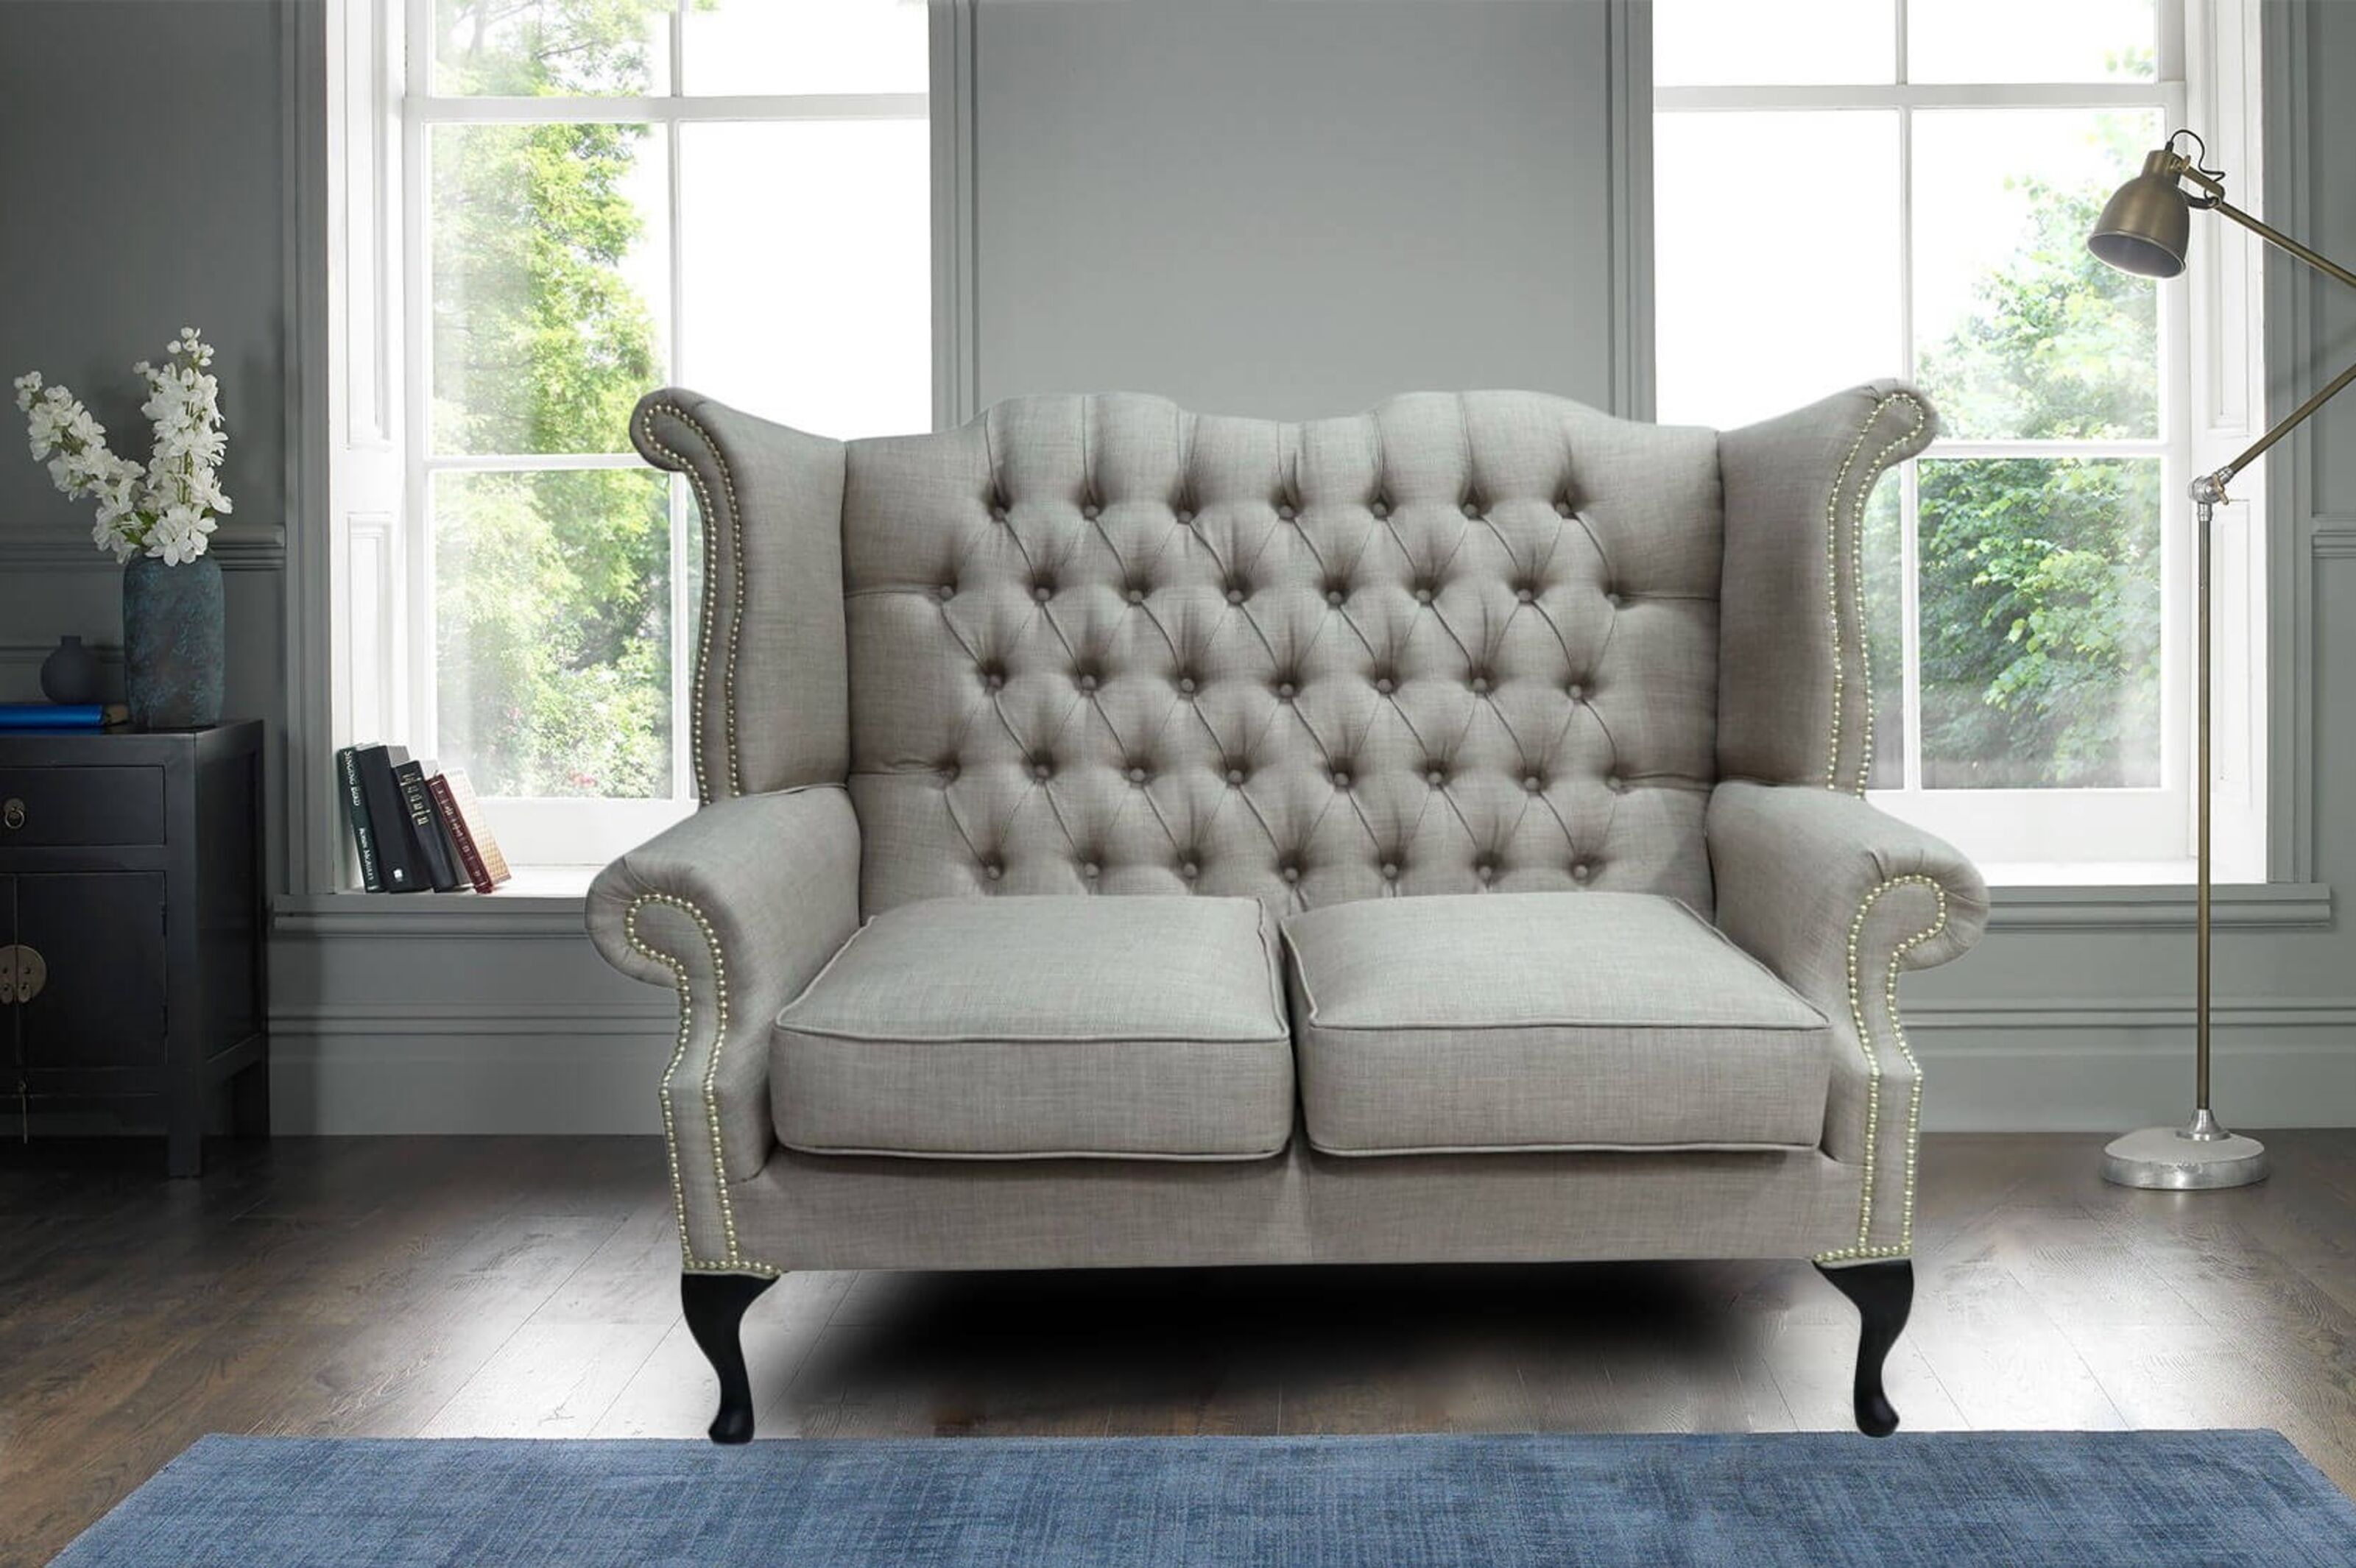 Sofa Shopping Made Easy: Buy Online and Save Your Precious Time  %Post Title